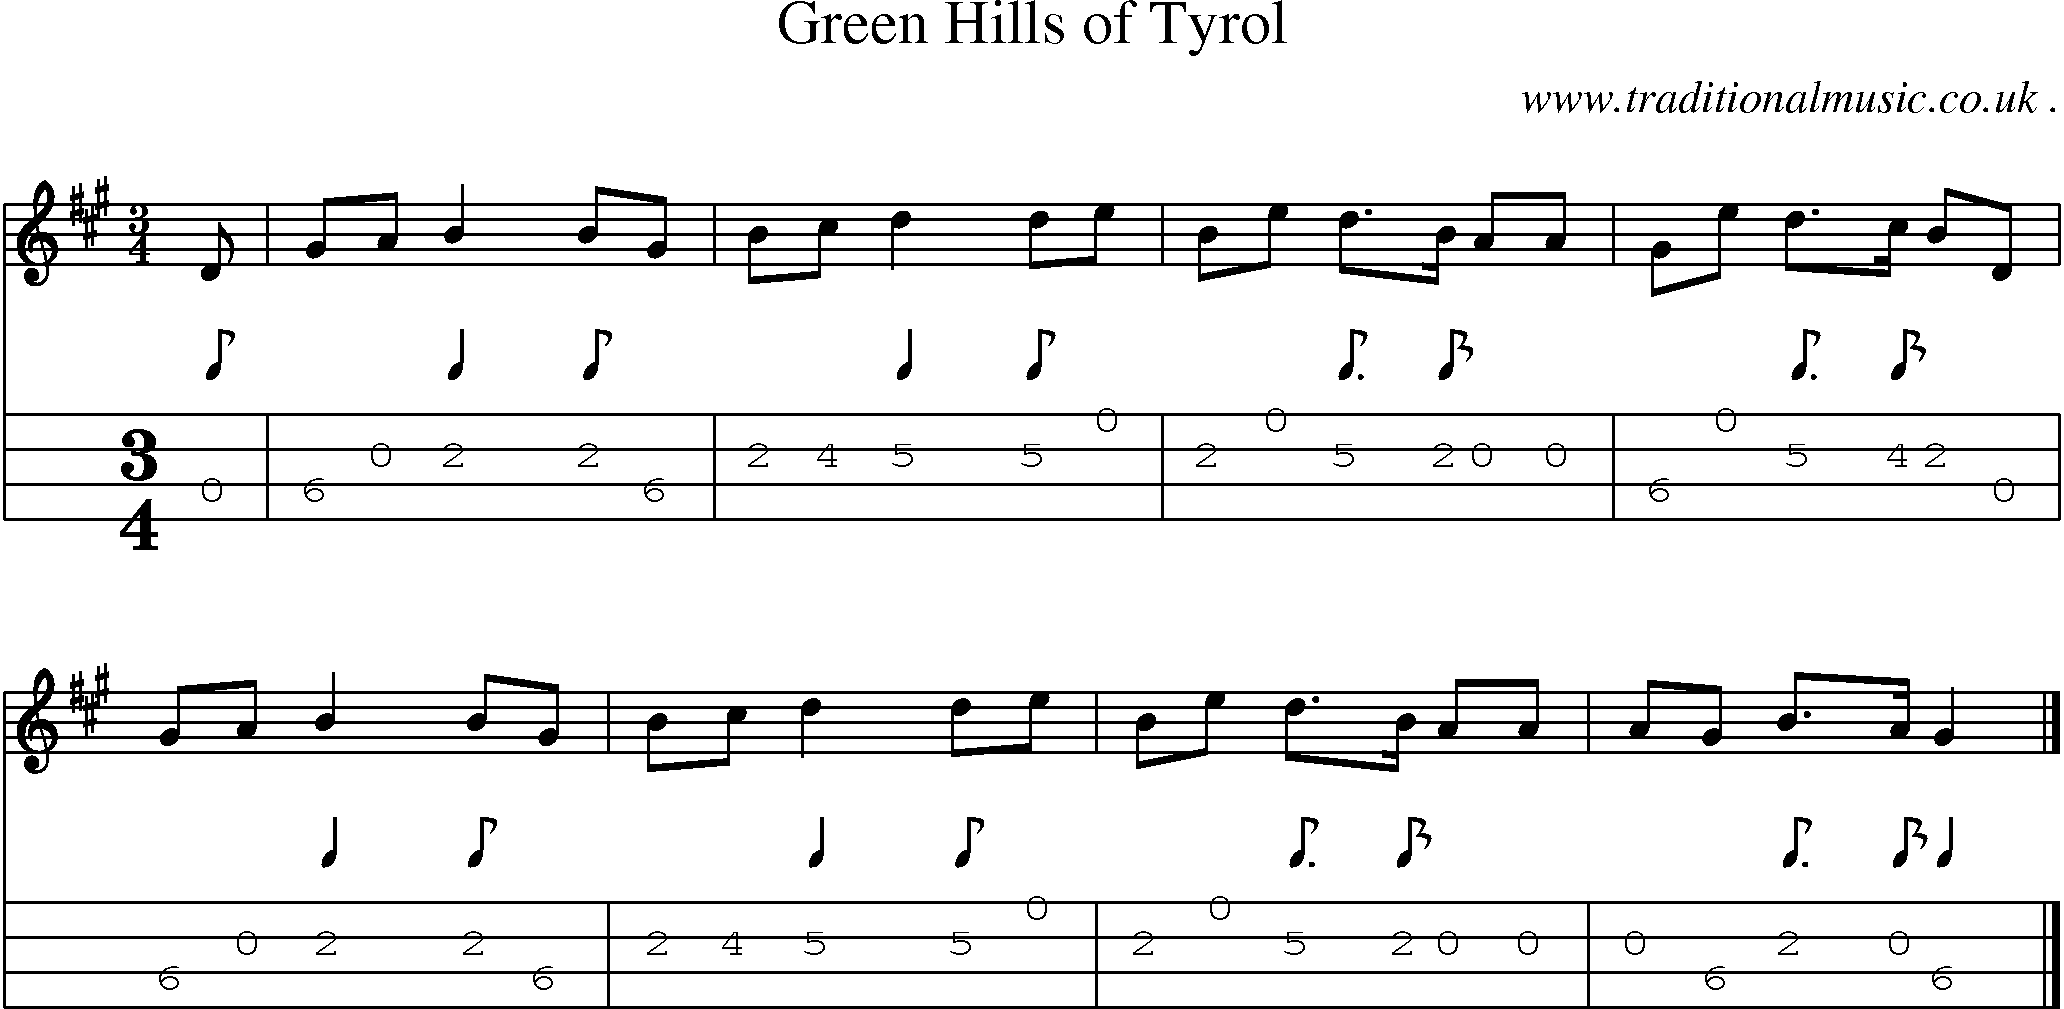 Sheet-music  score, Chords and Mandolin Tabs for Green Hills Of Tyrol